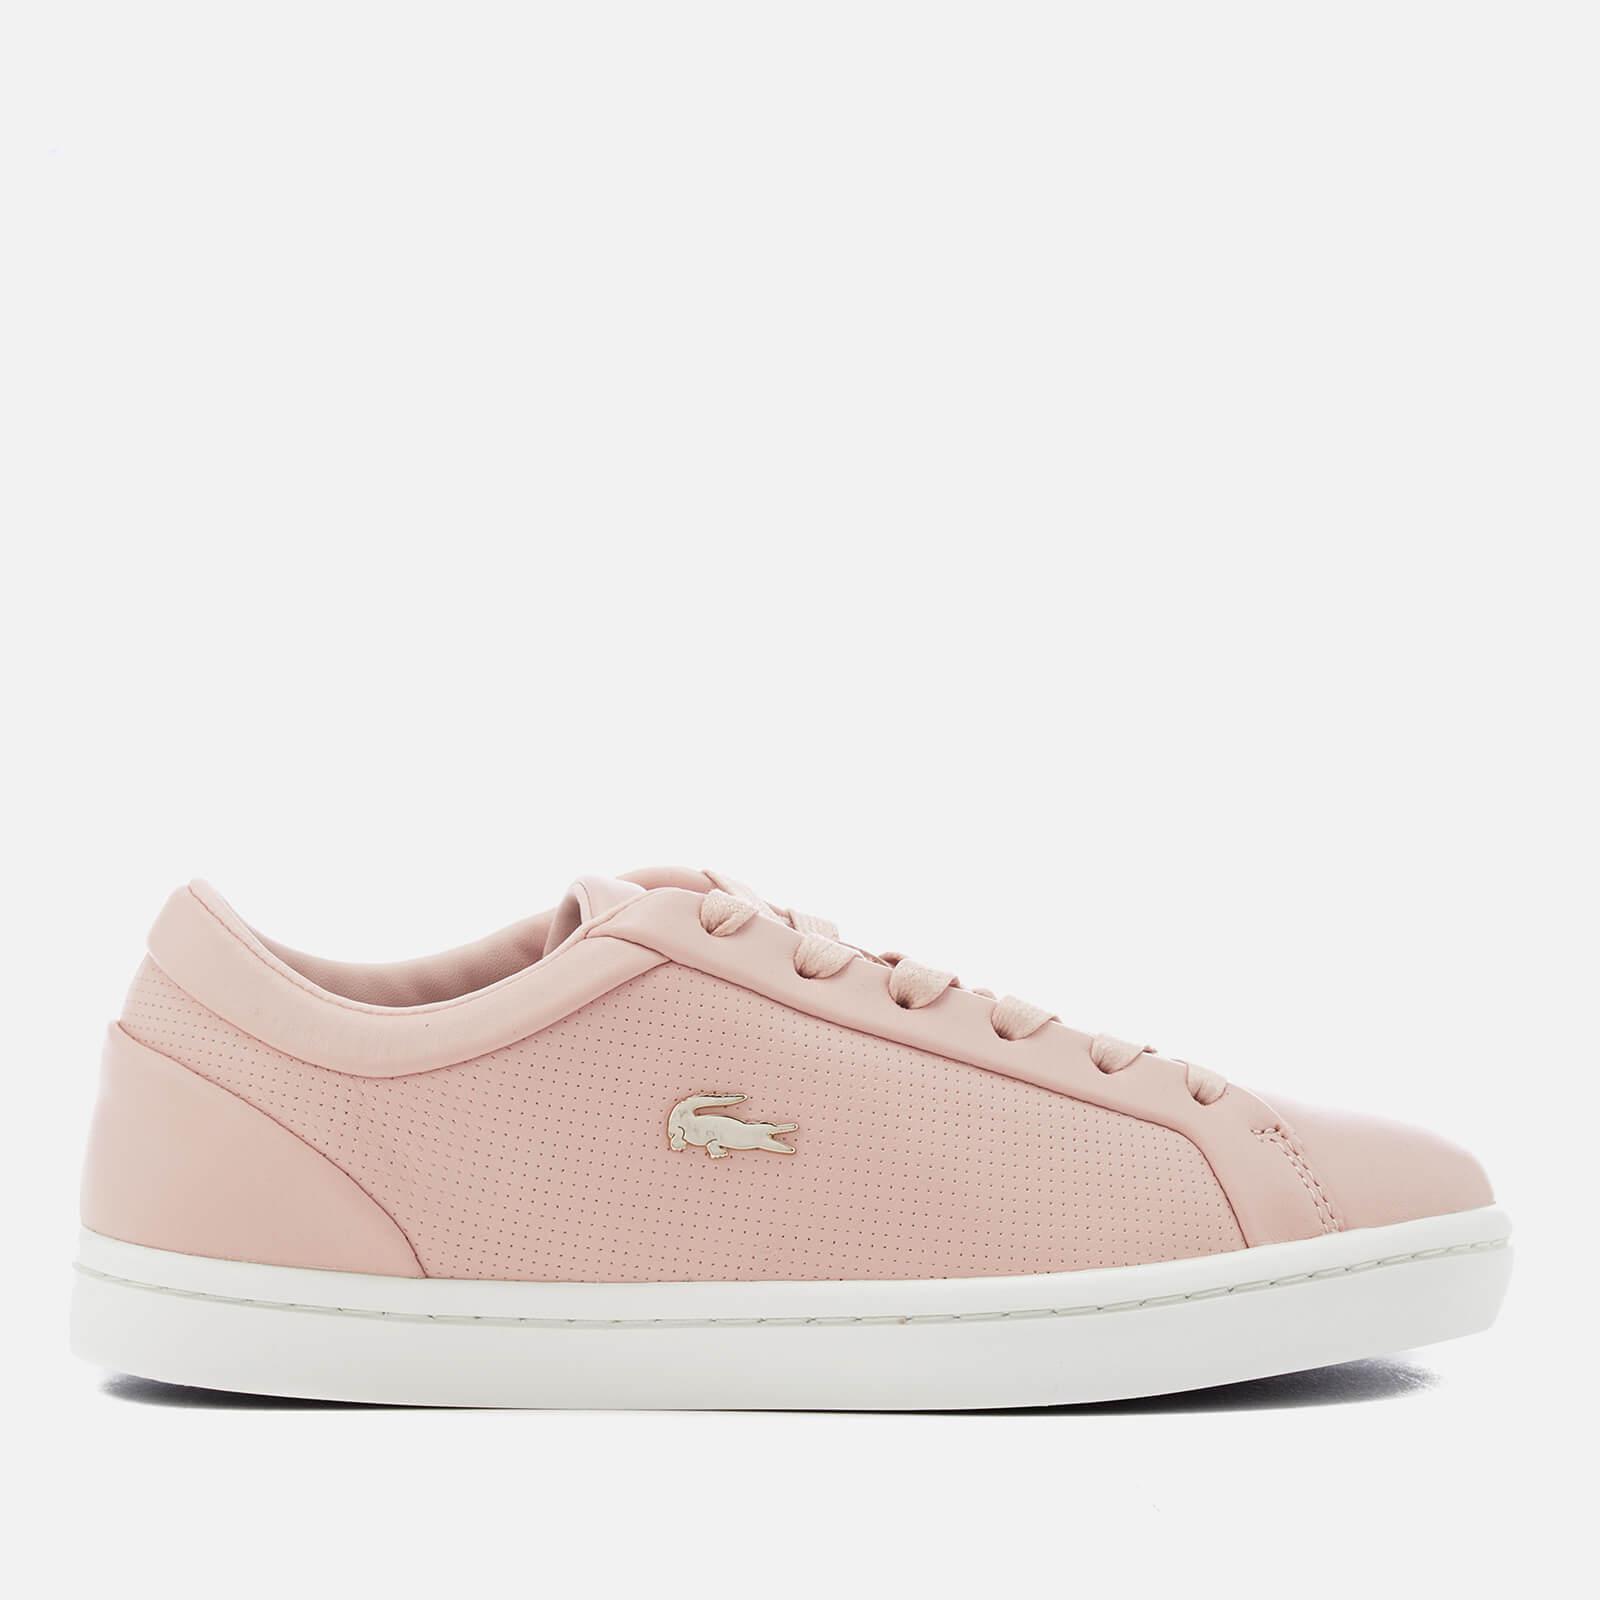 Lacoste Straightset 118 2 Leather Cupsole Trainers in Pink - Lyst